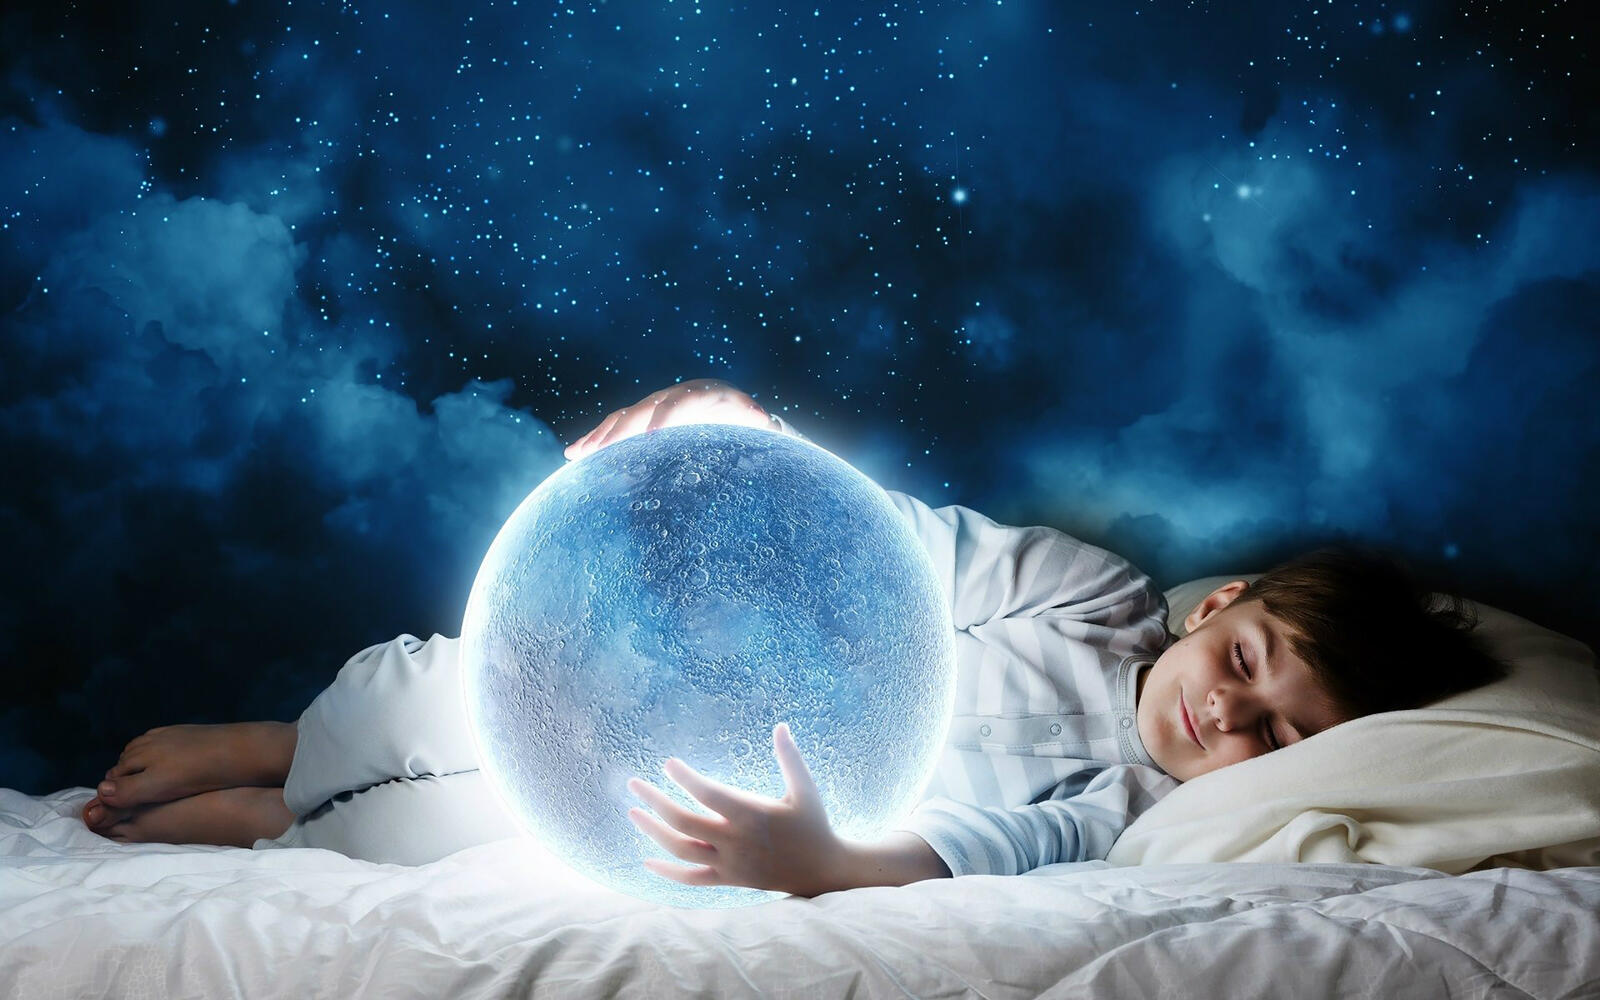 Free photo A boy sleeps with a nightlight in the form of a glowing moon.